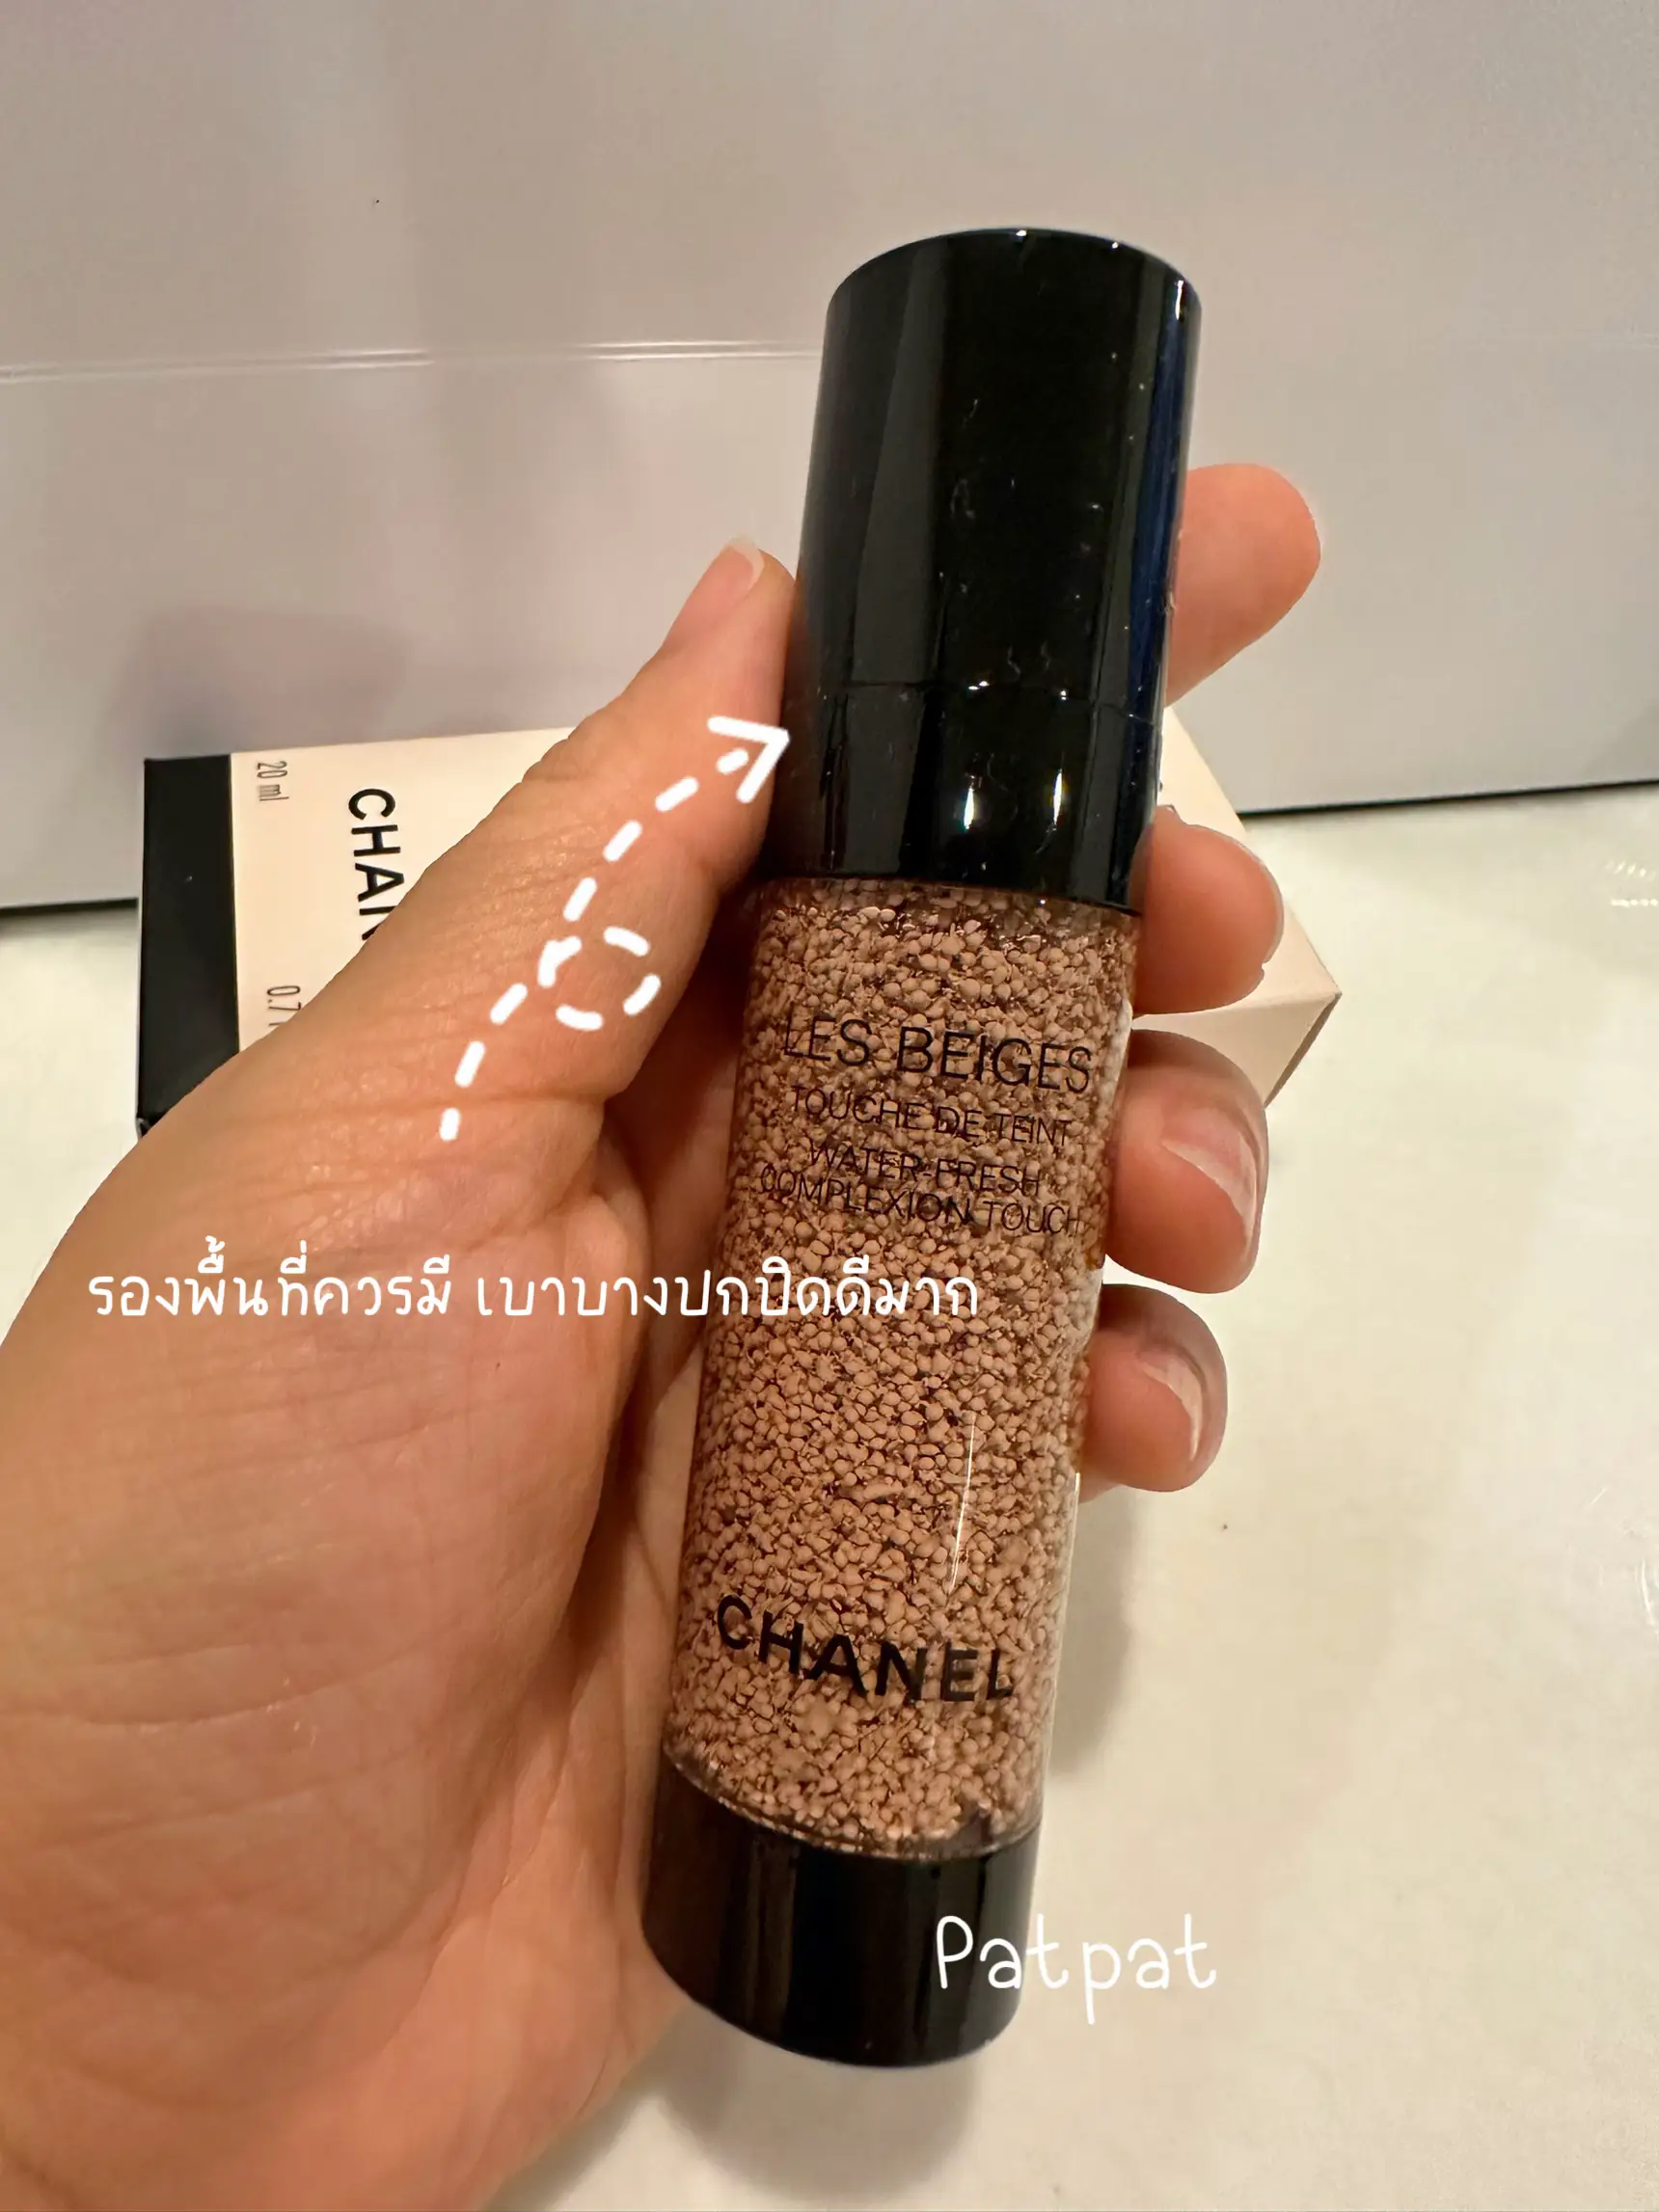 Good Skin Makeup Chanel Les Beiges✨, Gallery posted by Lazy review